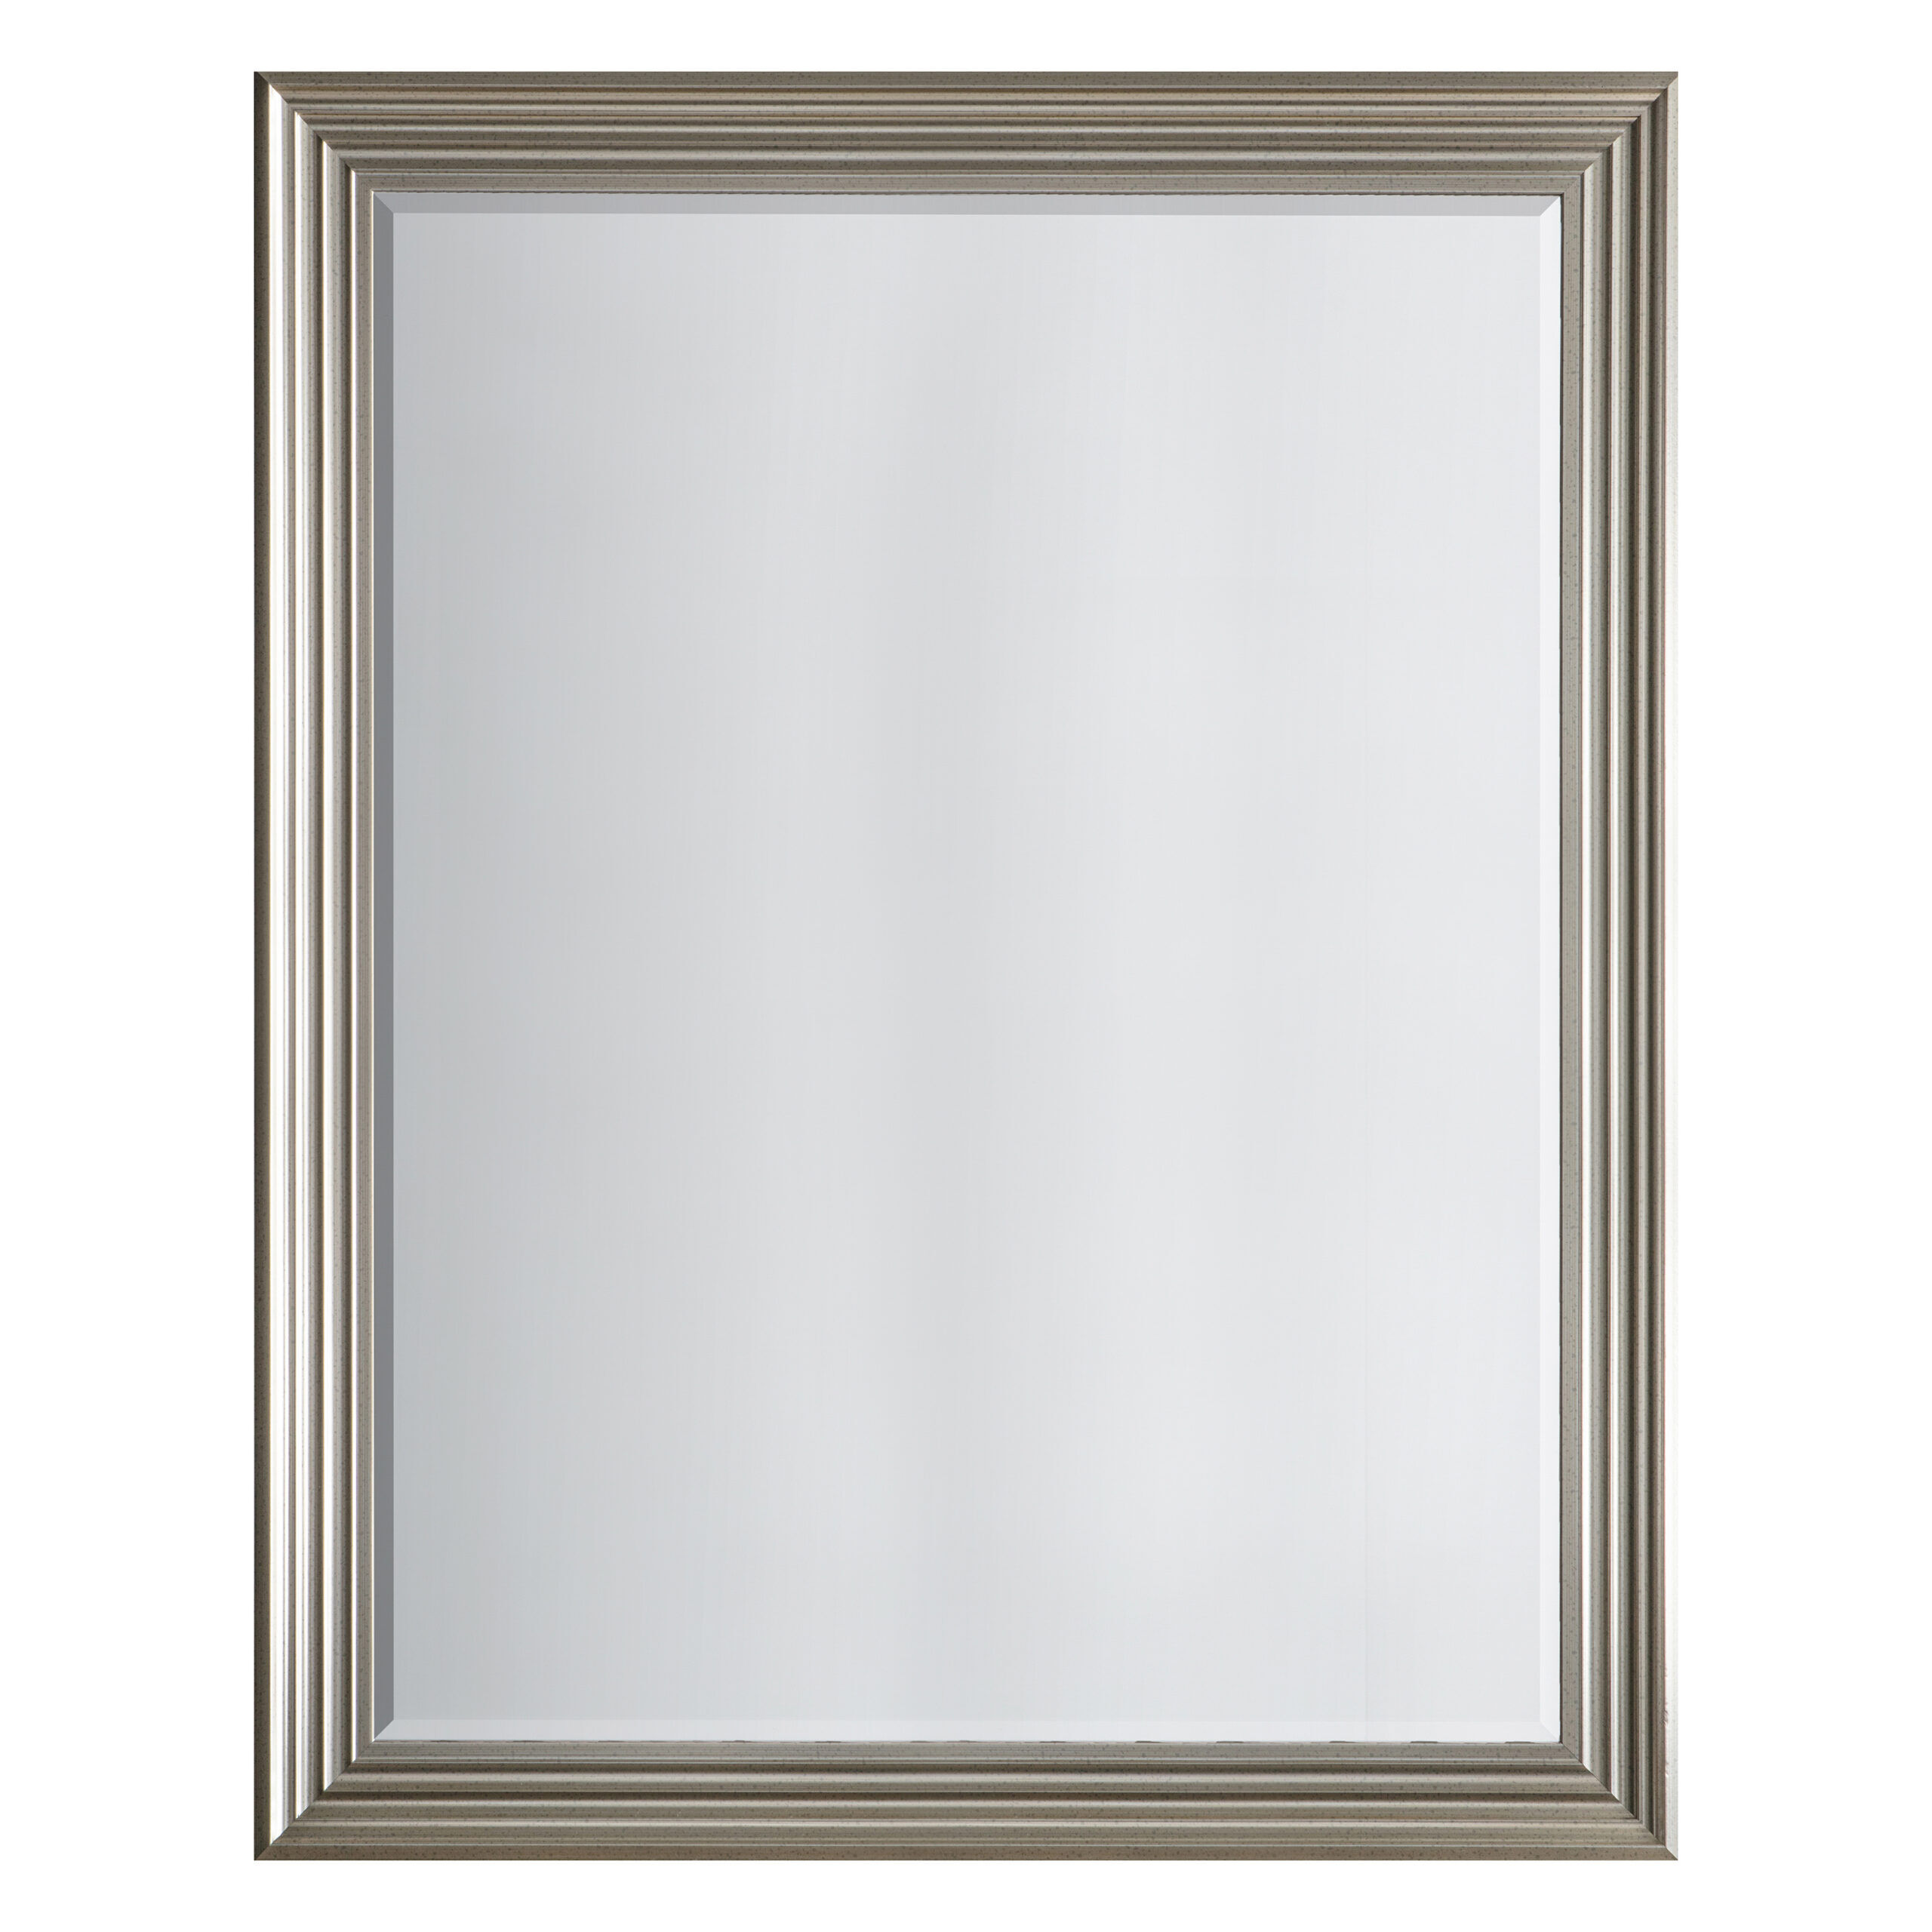 Photos - Wall Mirror Reflections Mirror Brushed Steel